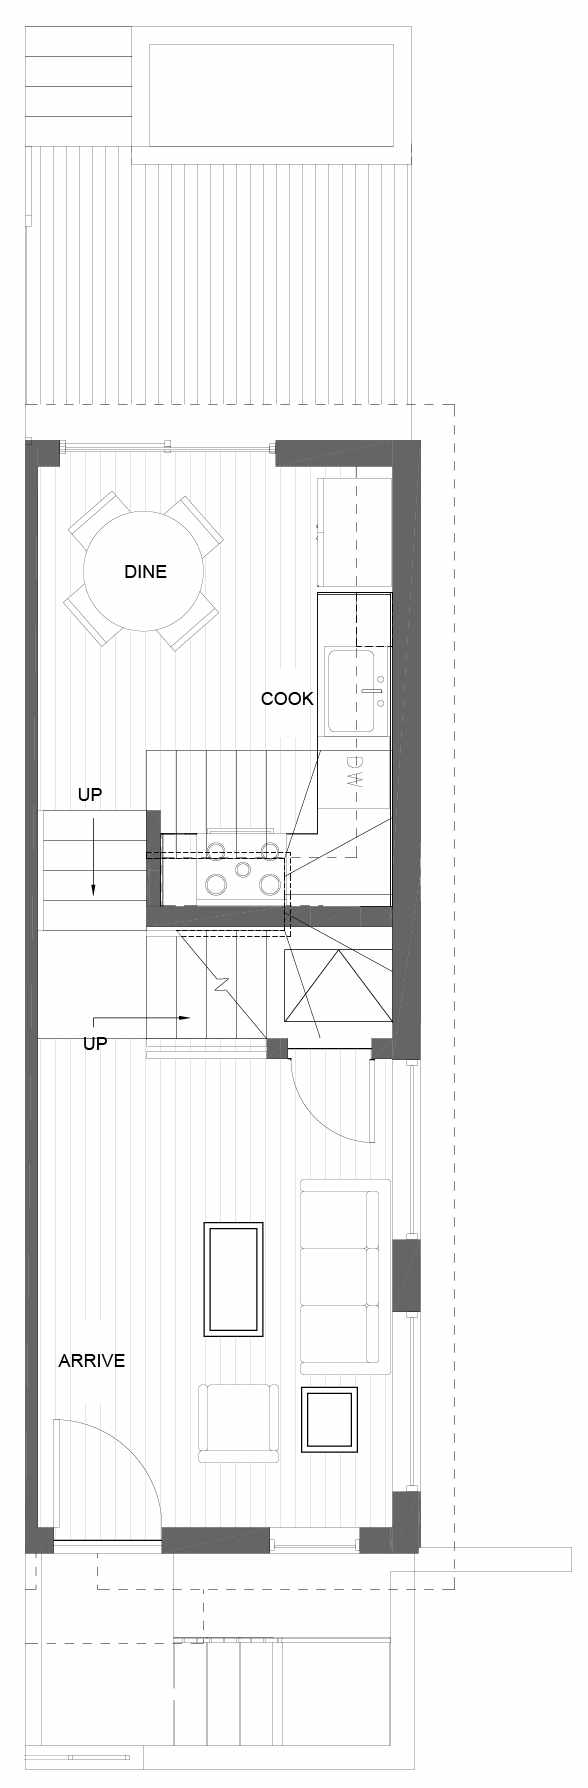 First Floor Plan of 3015D 30th Ave W, One of the Lochlan Townhomes by Isola Homes in Magnolia